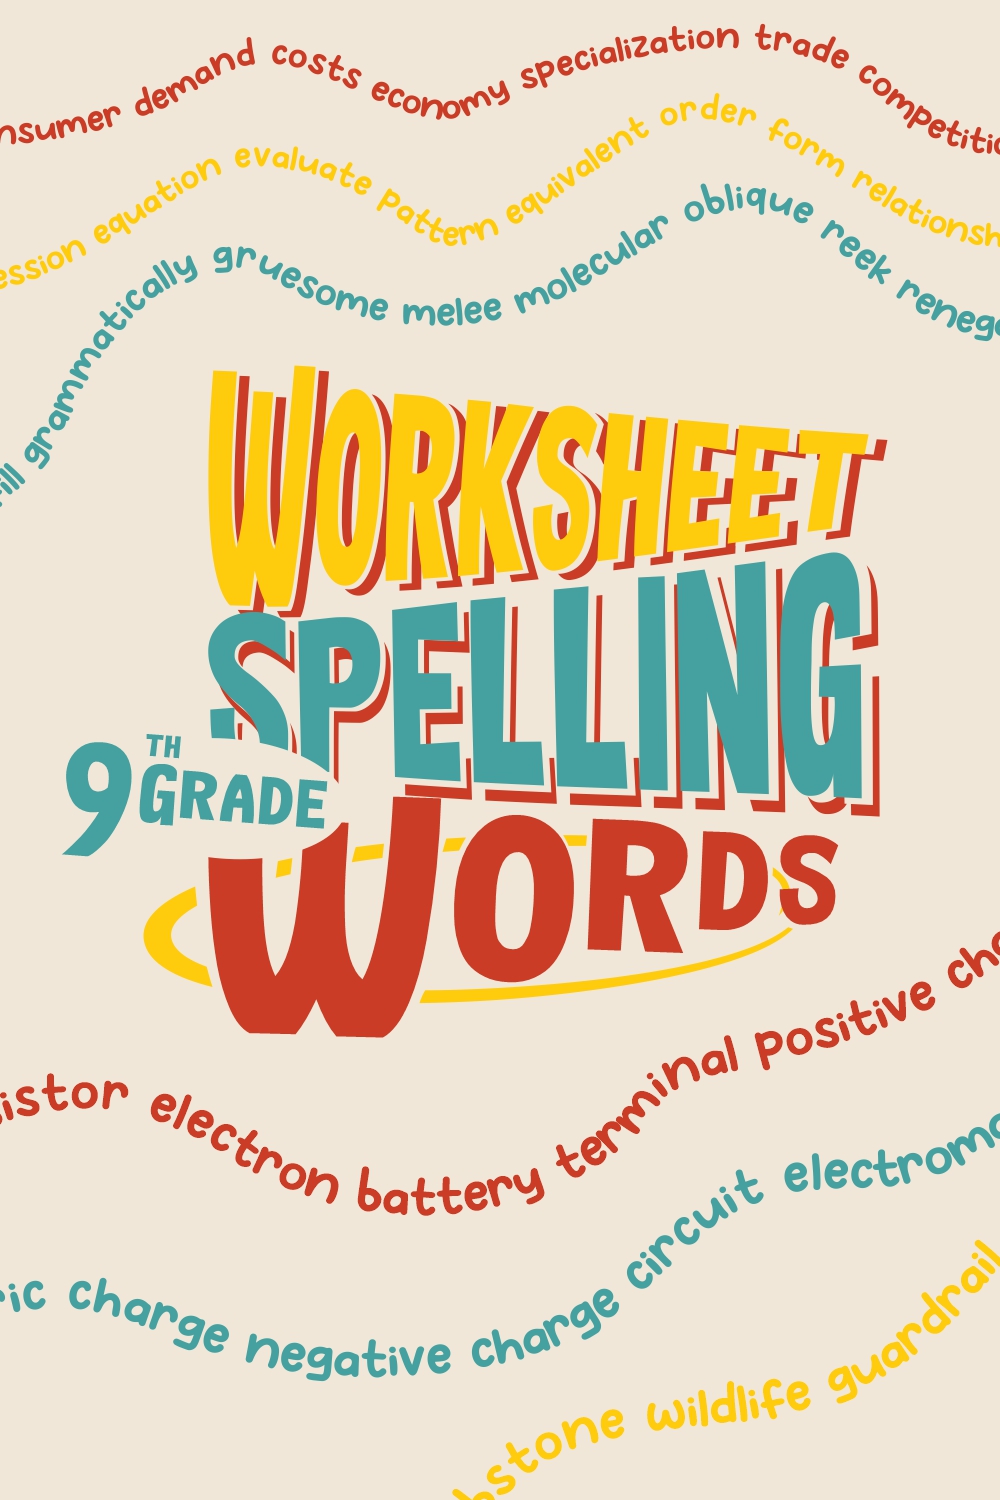 17 Images of 9th Grade Worksheets Spelling Words